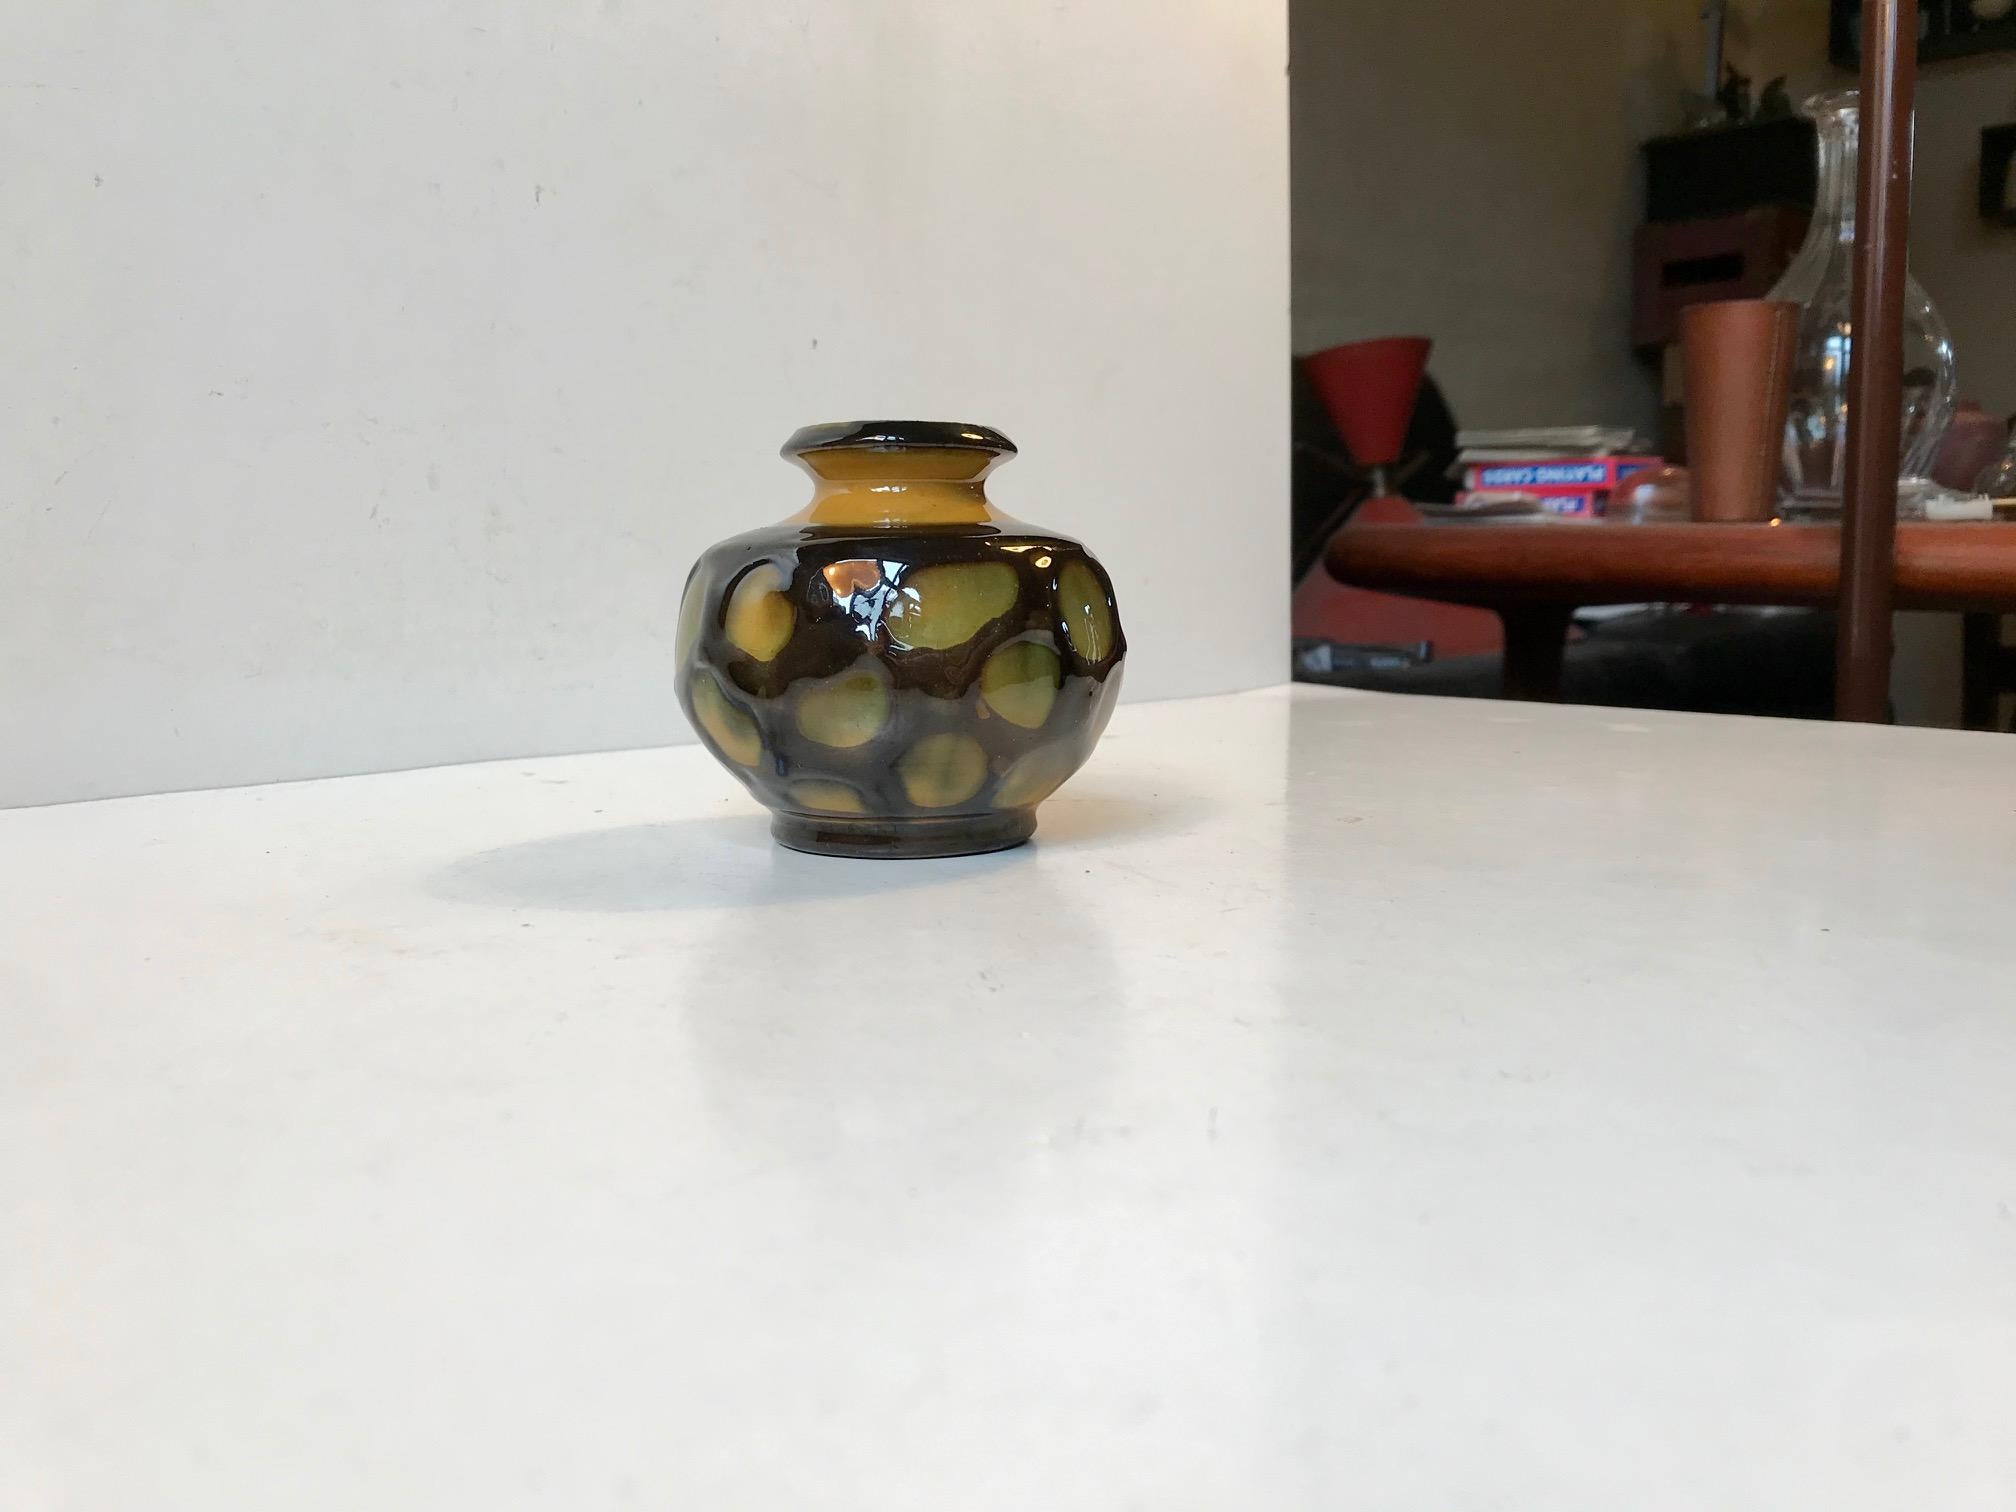 Small grenade shaped vase decorated with dots in high-gloss green, yellow and black glazes. Made by Herman August Kähler and is signed HAK - Denmark to the base.